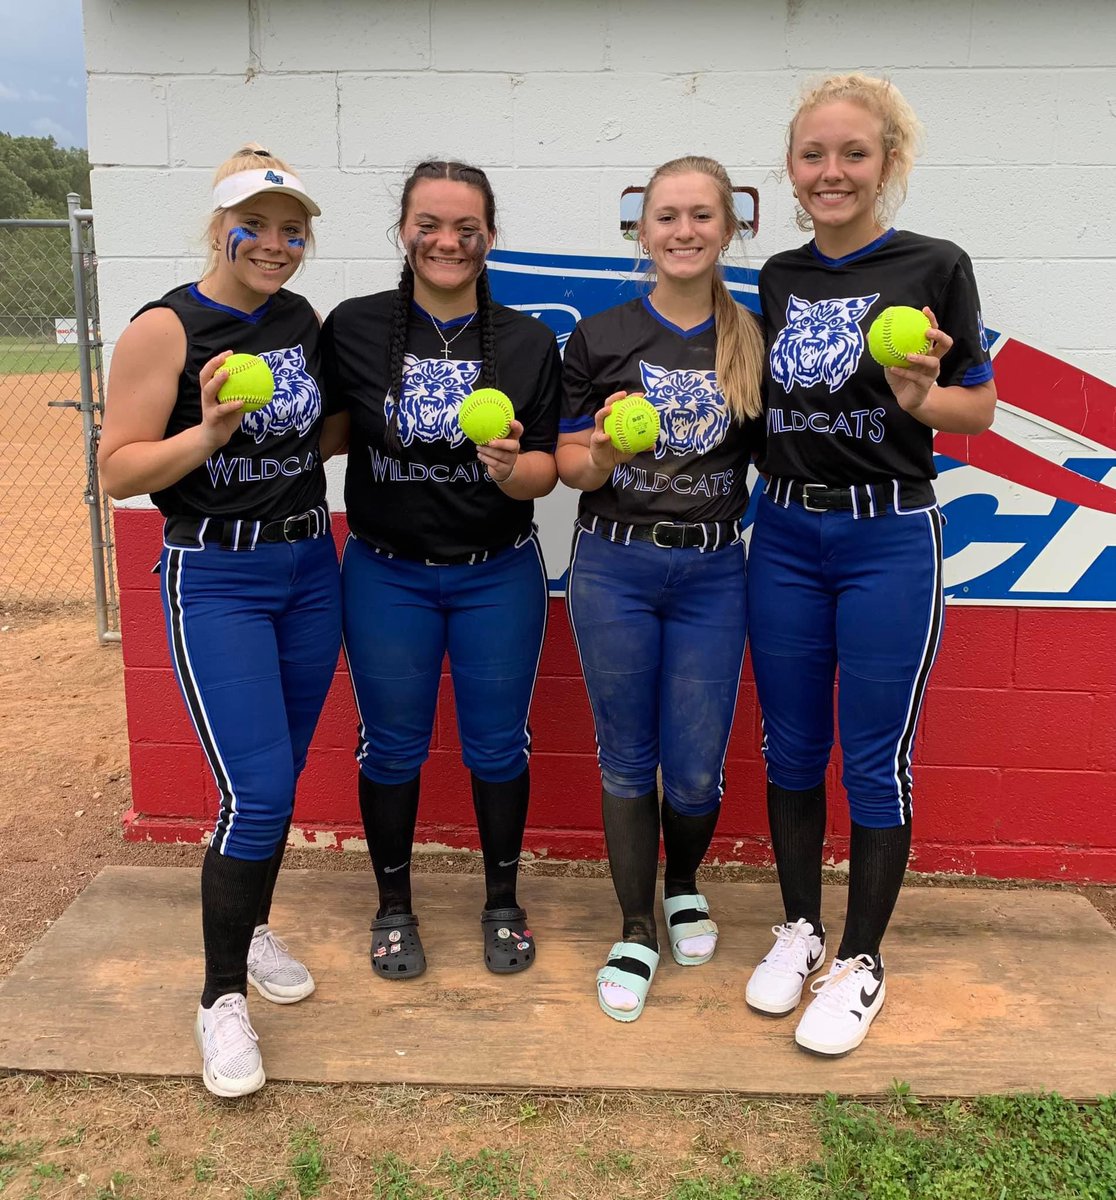 Bomb squad showed up today in our 17-7 win over Massac County! #softball #getinthemlegs